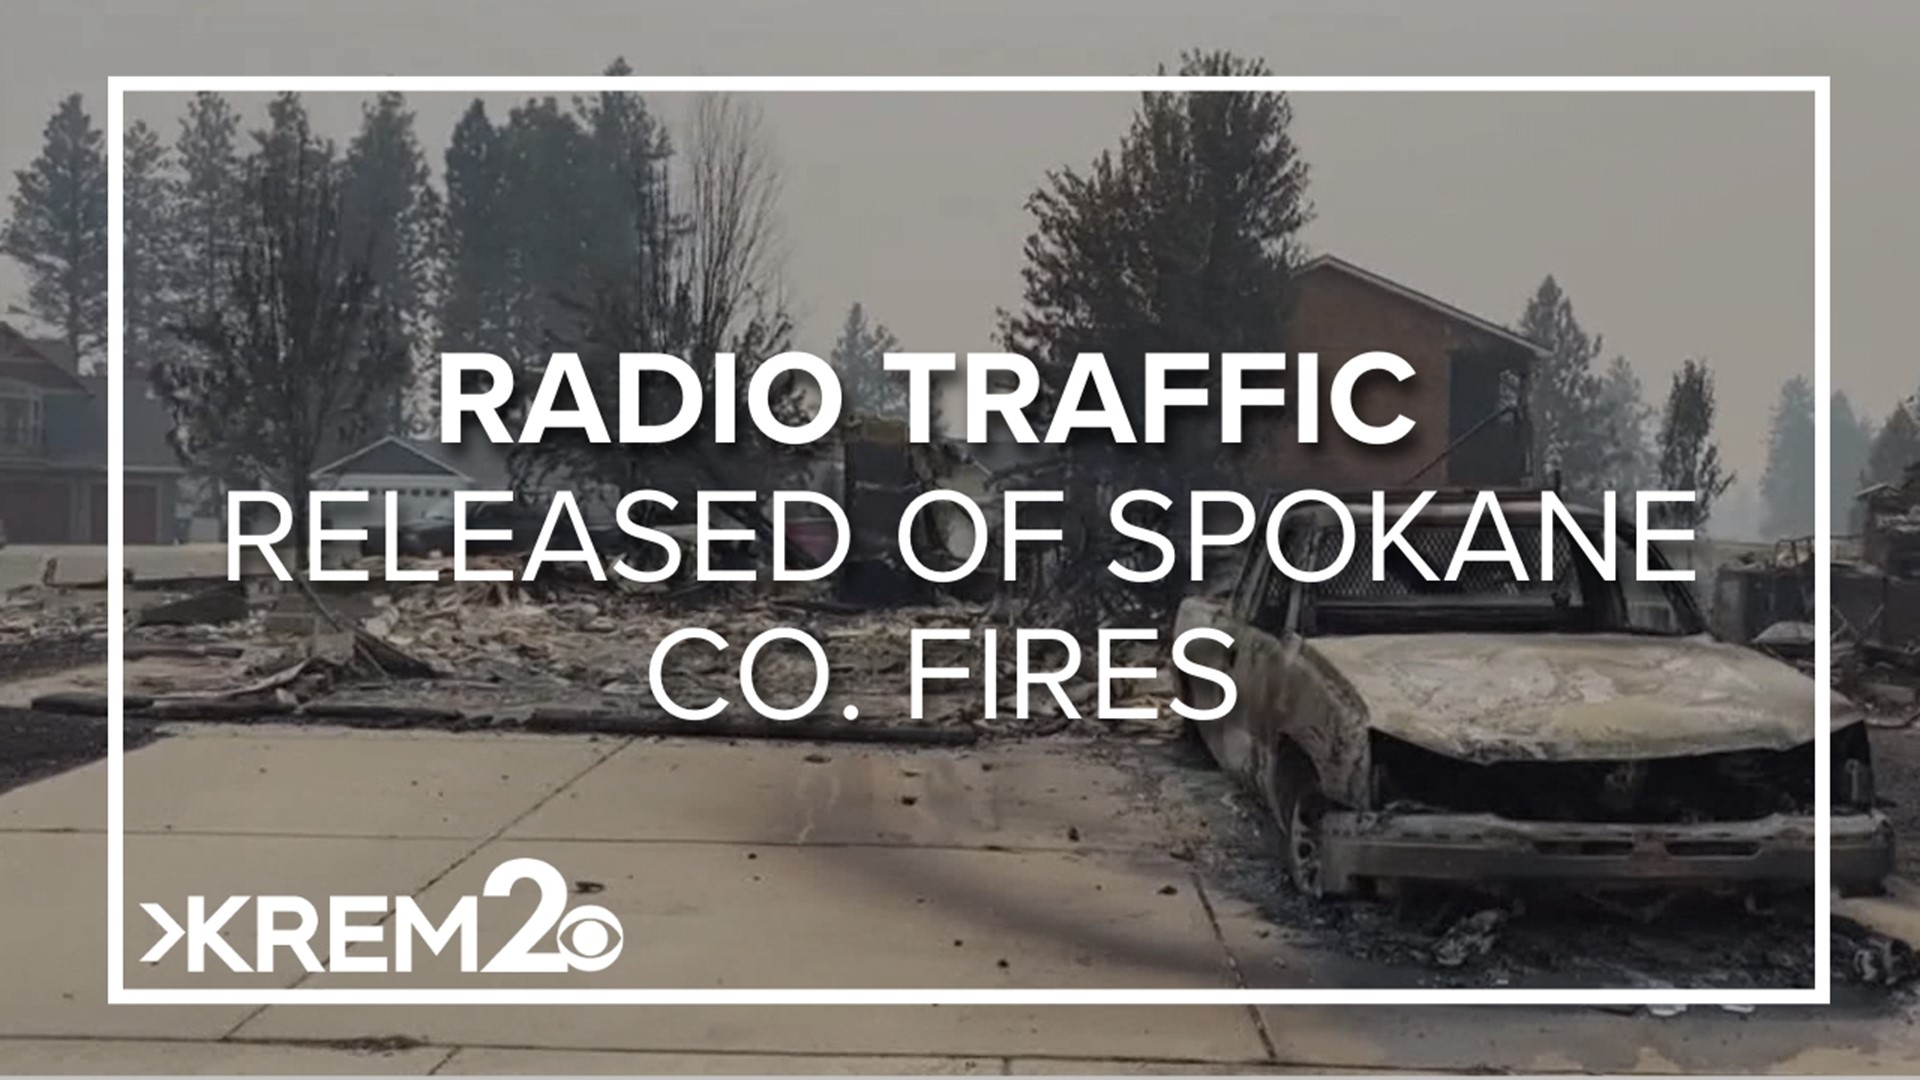 KREM 2 obtained audio files of police scanner traffic from the day two destructive wildfires sparked in Spokane County.